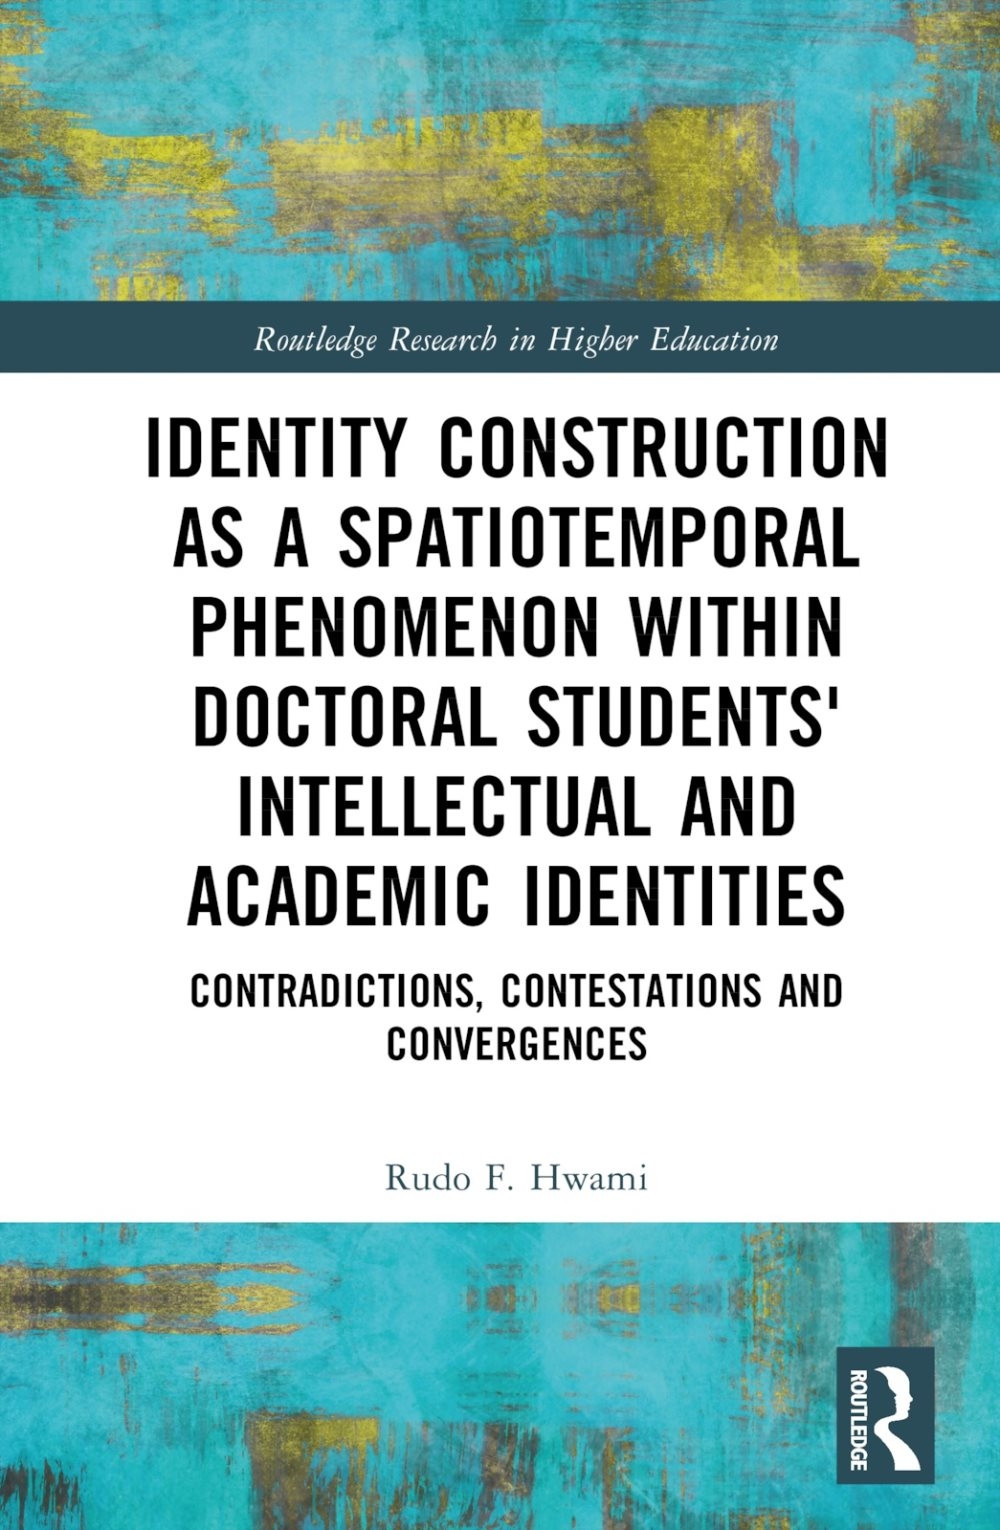 Identity Construction as a Spatiotemporal Phenomenon Within Doctoral Students’ Intellectual and Academic Identities: Contradictions, Contestations and